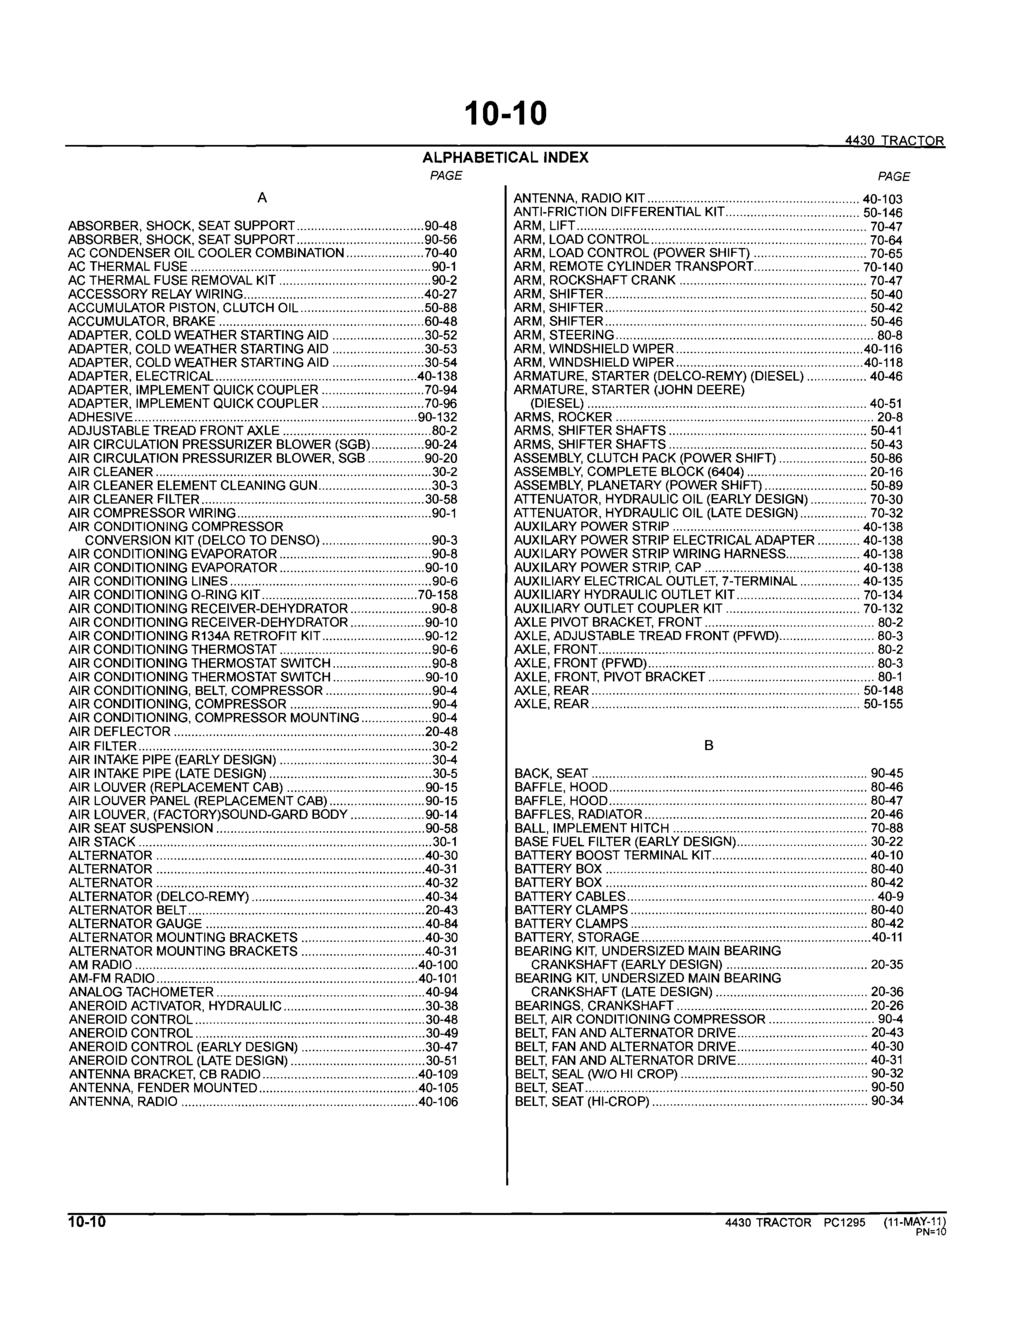 10-10 ALPHABETICAL INDEX PAGE 4430 TRACTOR A ANTENNA, RADIO KIT... 40-103 ANTI-FRICTION DIFFERENTIAL KIT... 50-146 ABSORBER, SHOCK, SEAT SUPPORT... 90-48 ARM, LIFT.